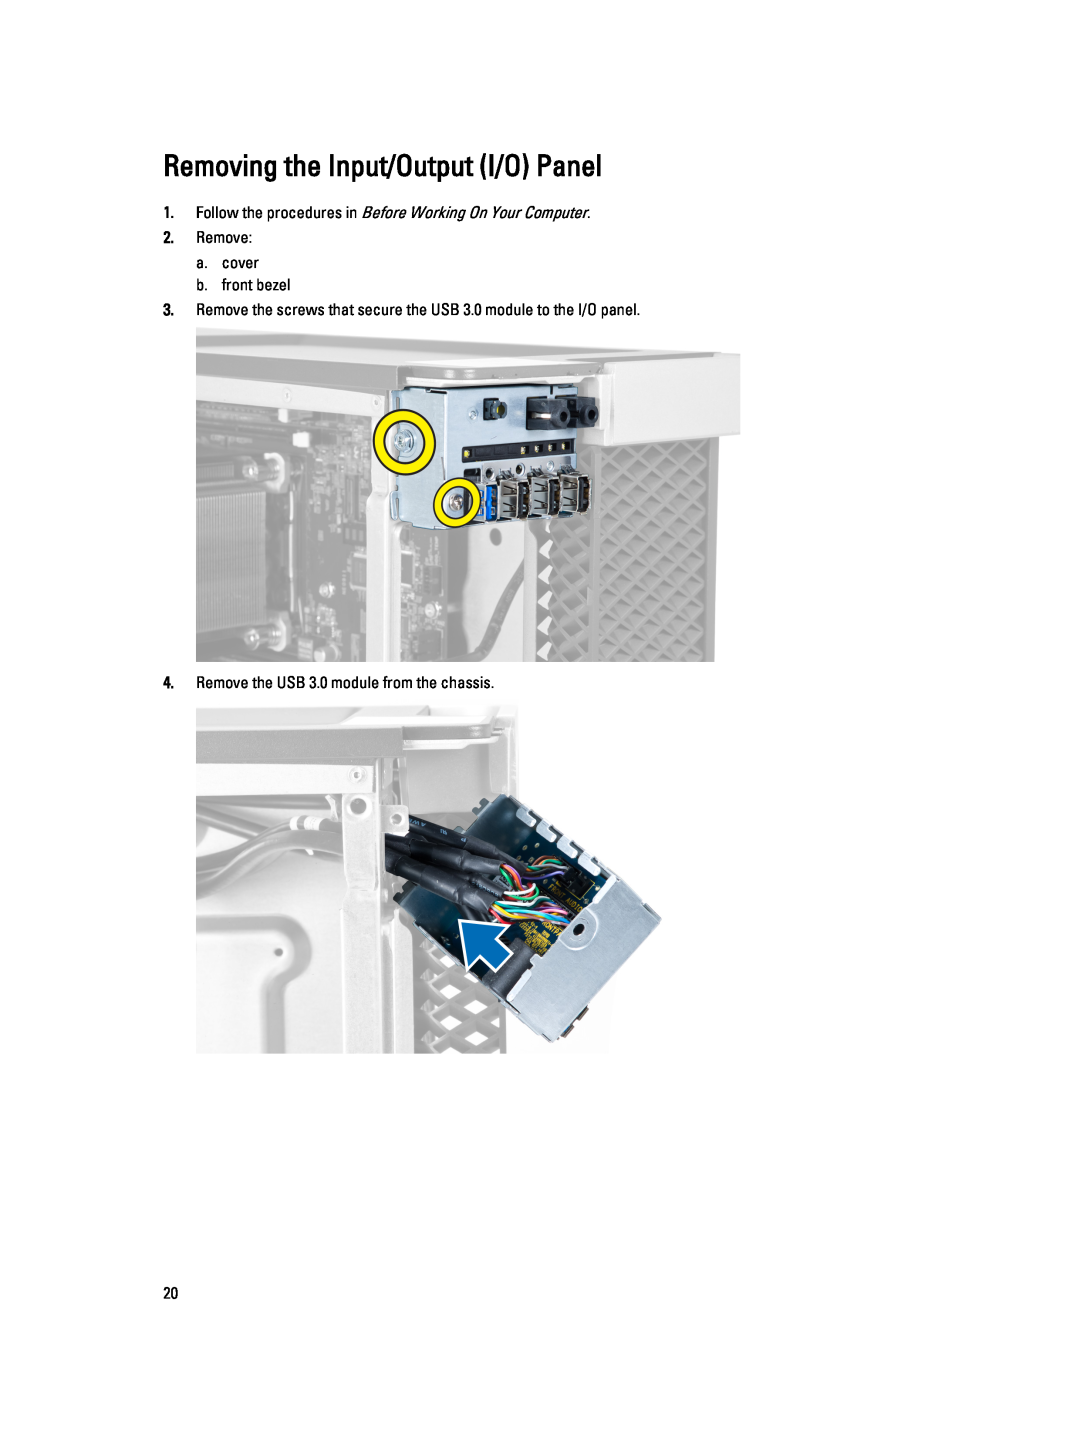 Dell T5610 owner manual Removing the Input/Output I/O Panel, Follow the procedures in Before Working On Your Computer 